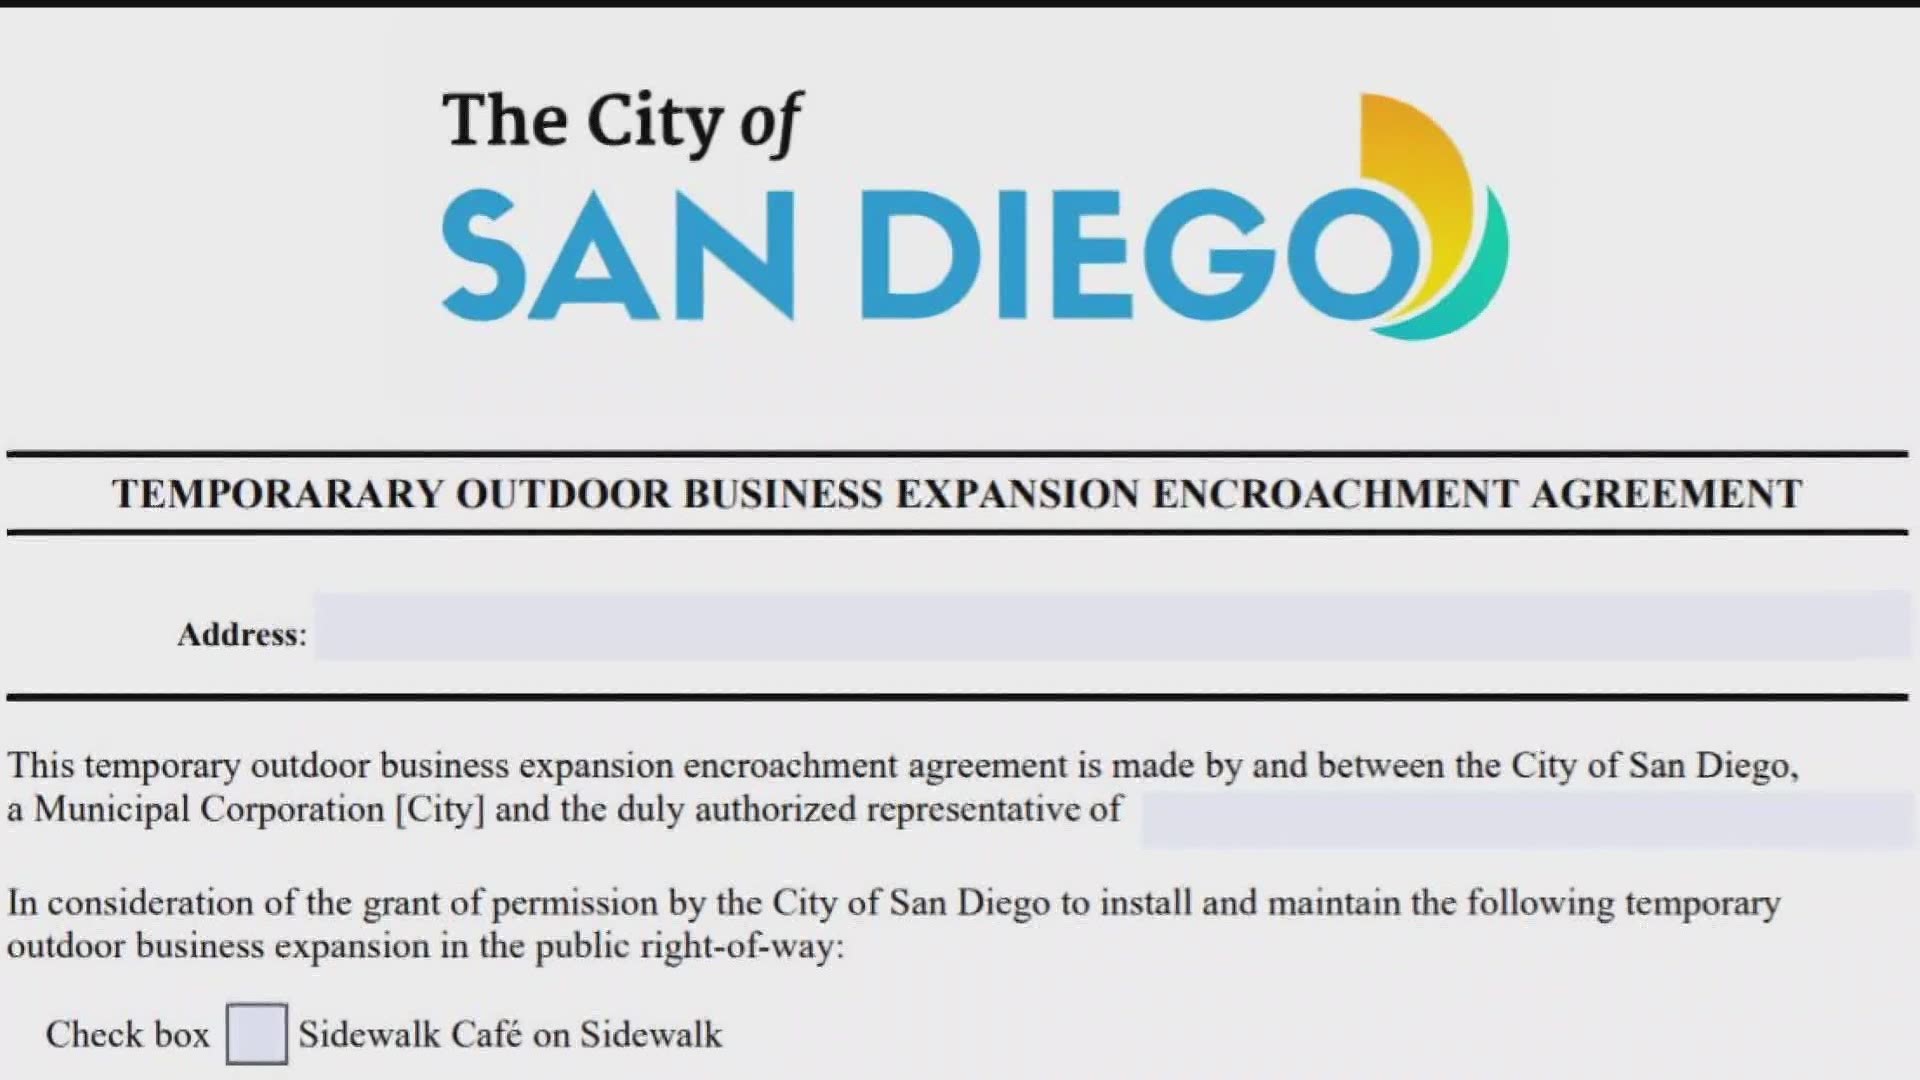 According to the city of San Diego’s director of economic development, the city will start enforcing permit restrictions on Aug. 2.